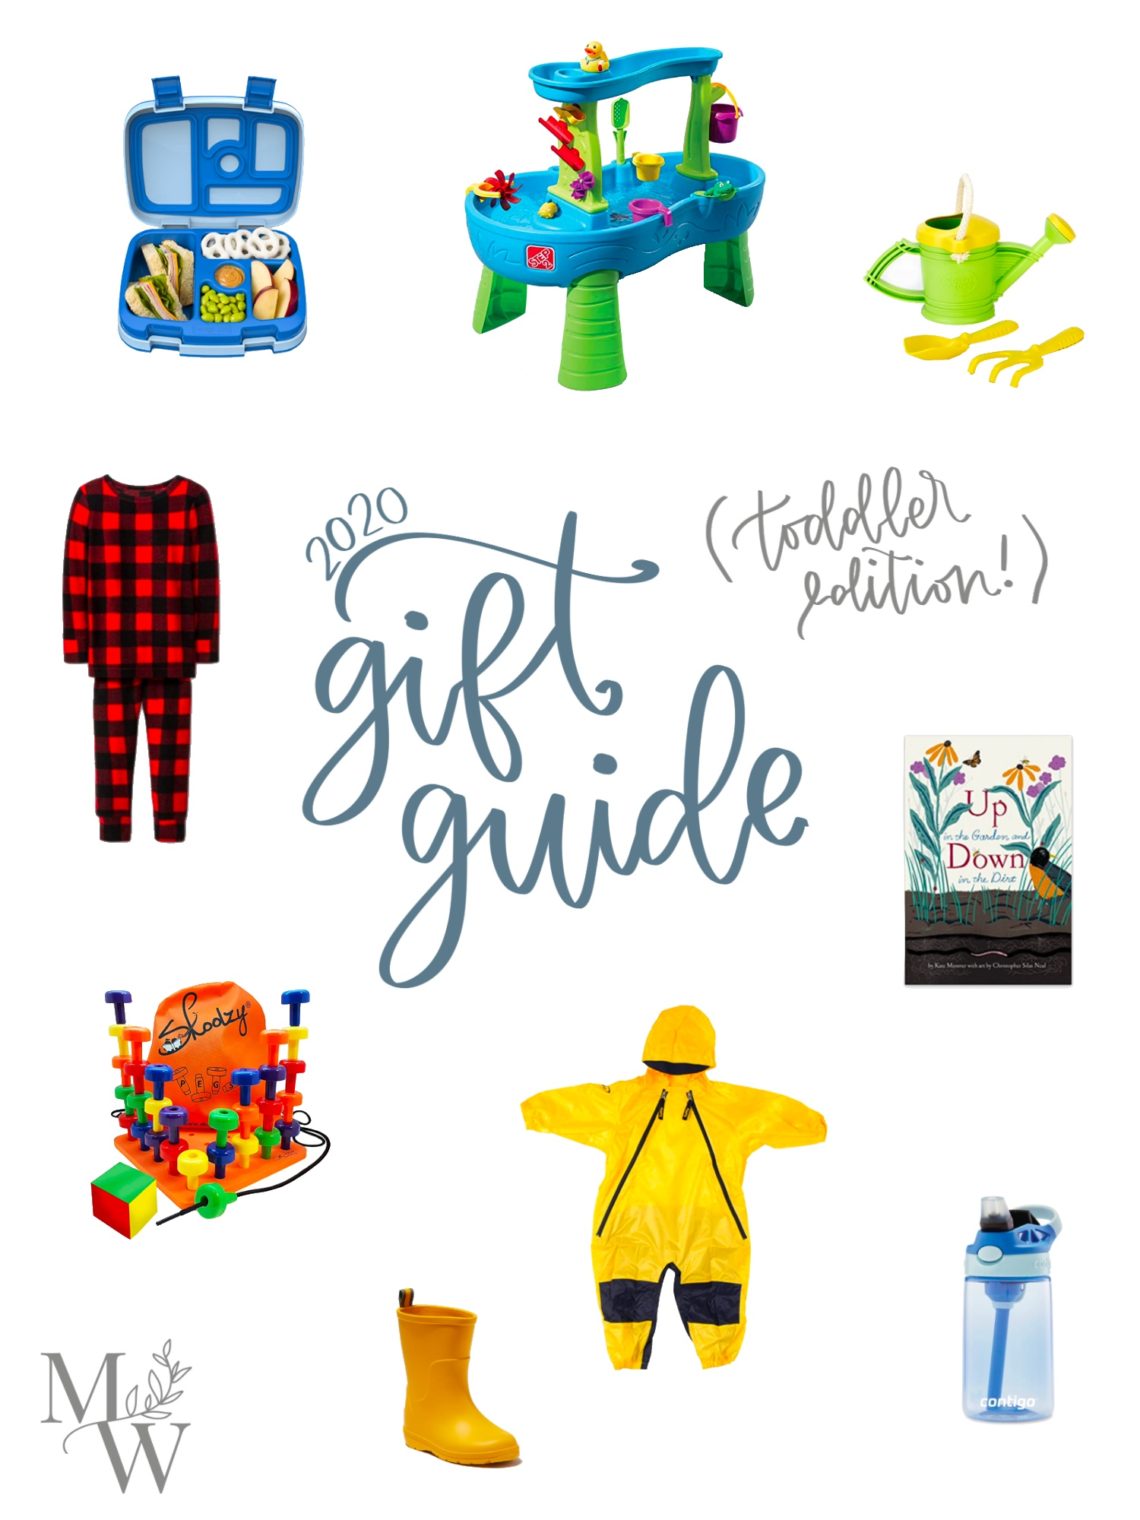 2020 Gift Guide (Toddler Edition!) - tried and tested Christmas gift ideas!